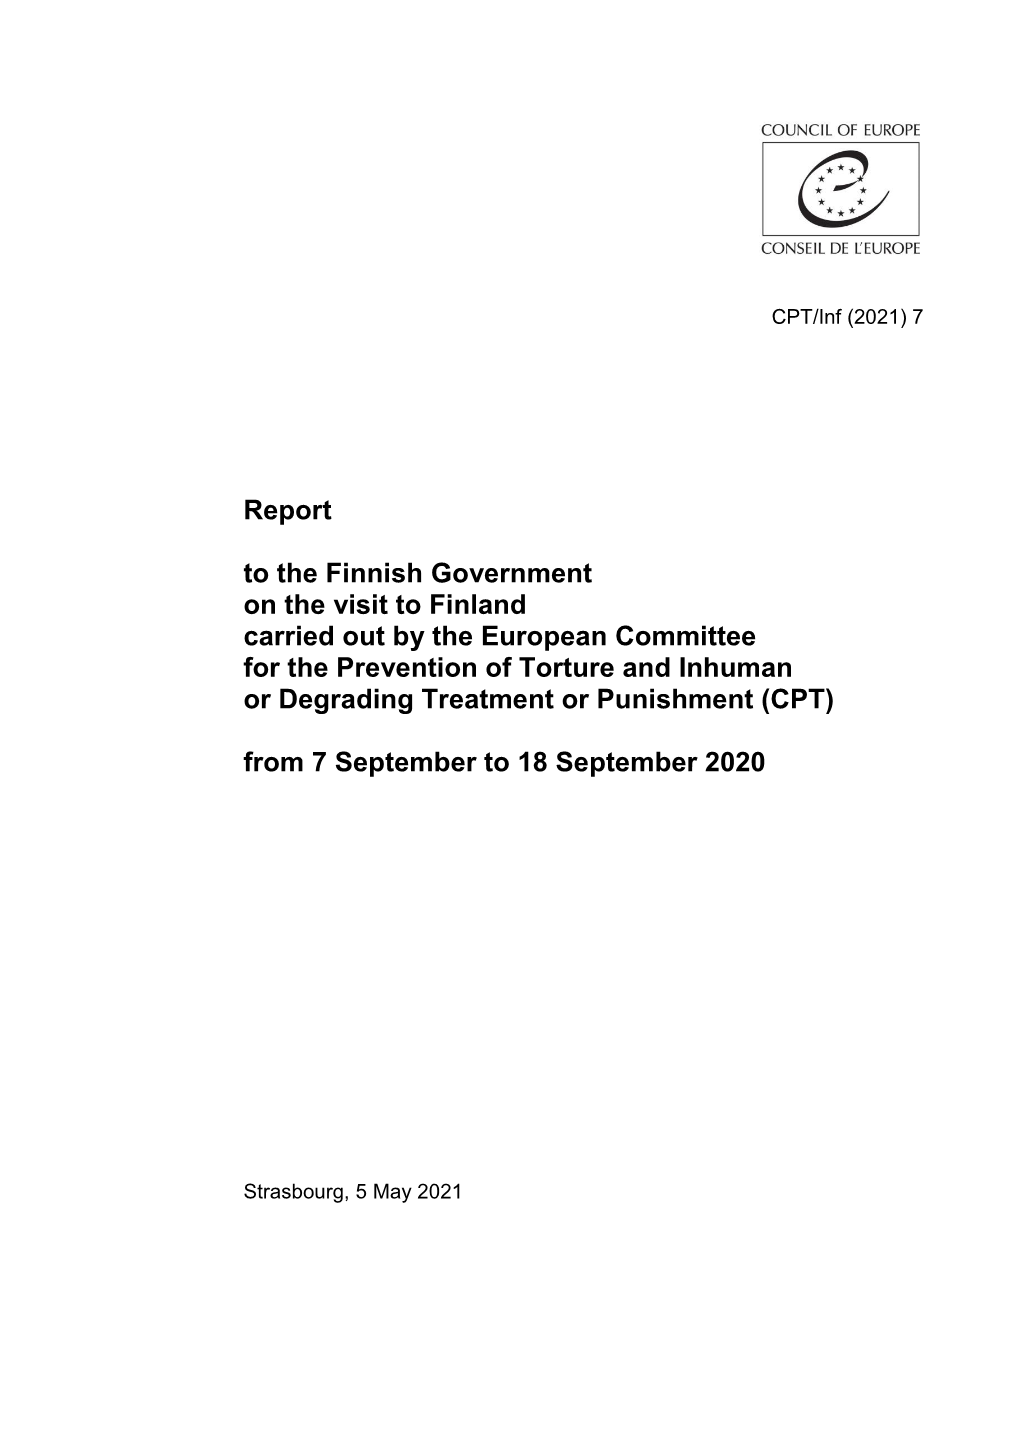 Report to the Finnish Government on the Visit to Finland Carried Out